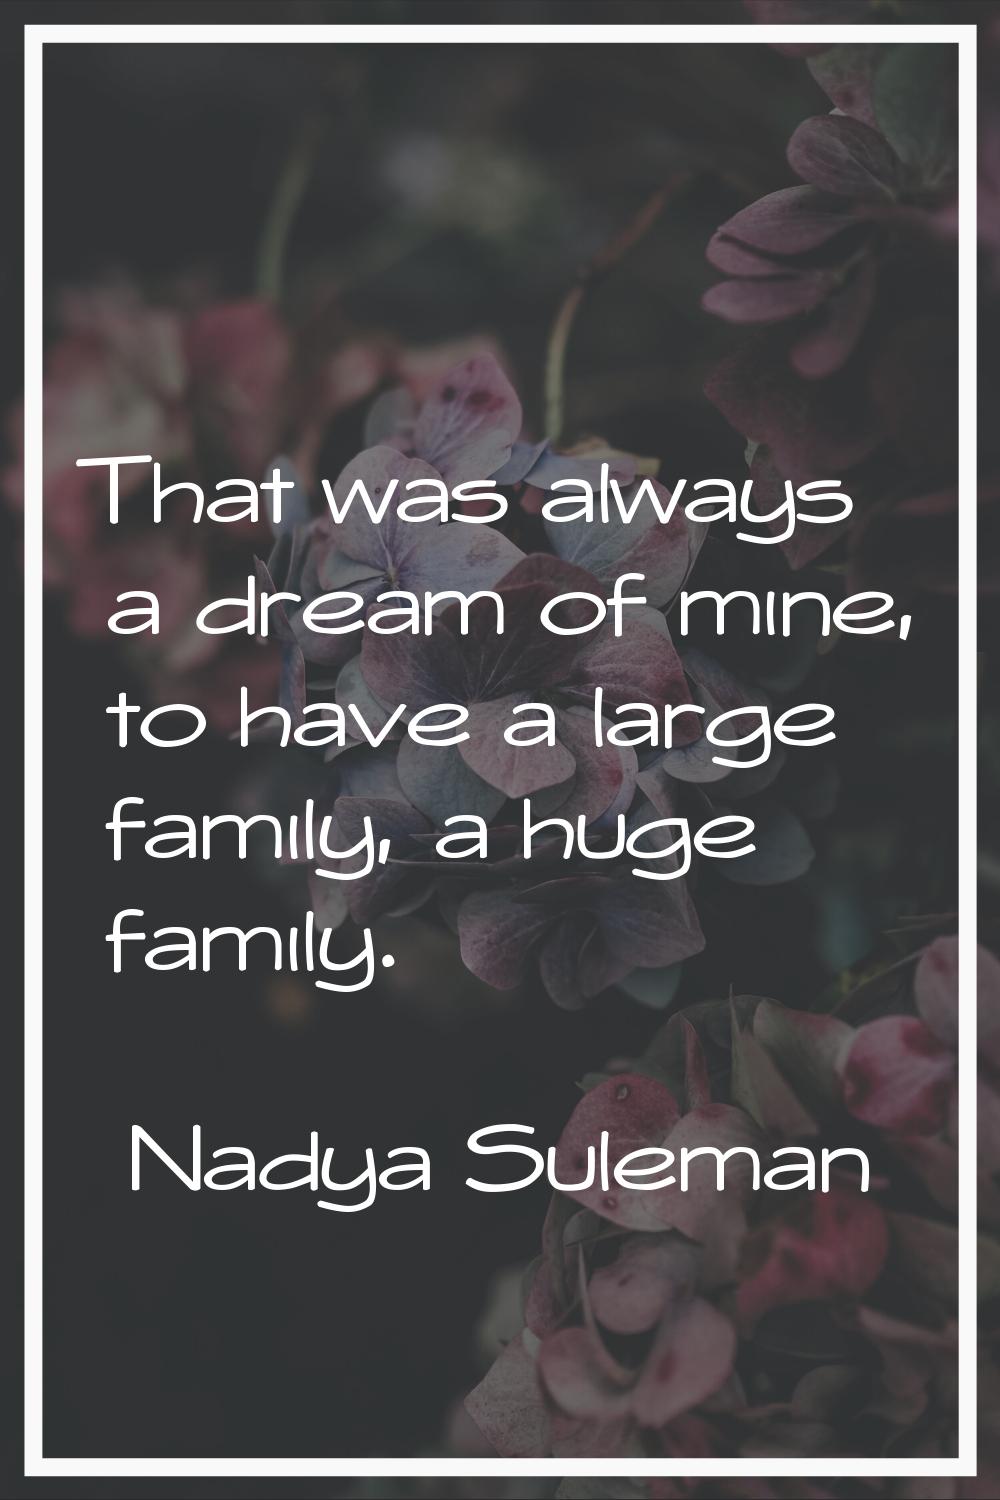 That was always a dream of mine, to have a large family, a huge family.